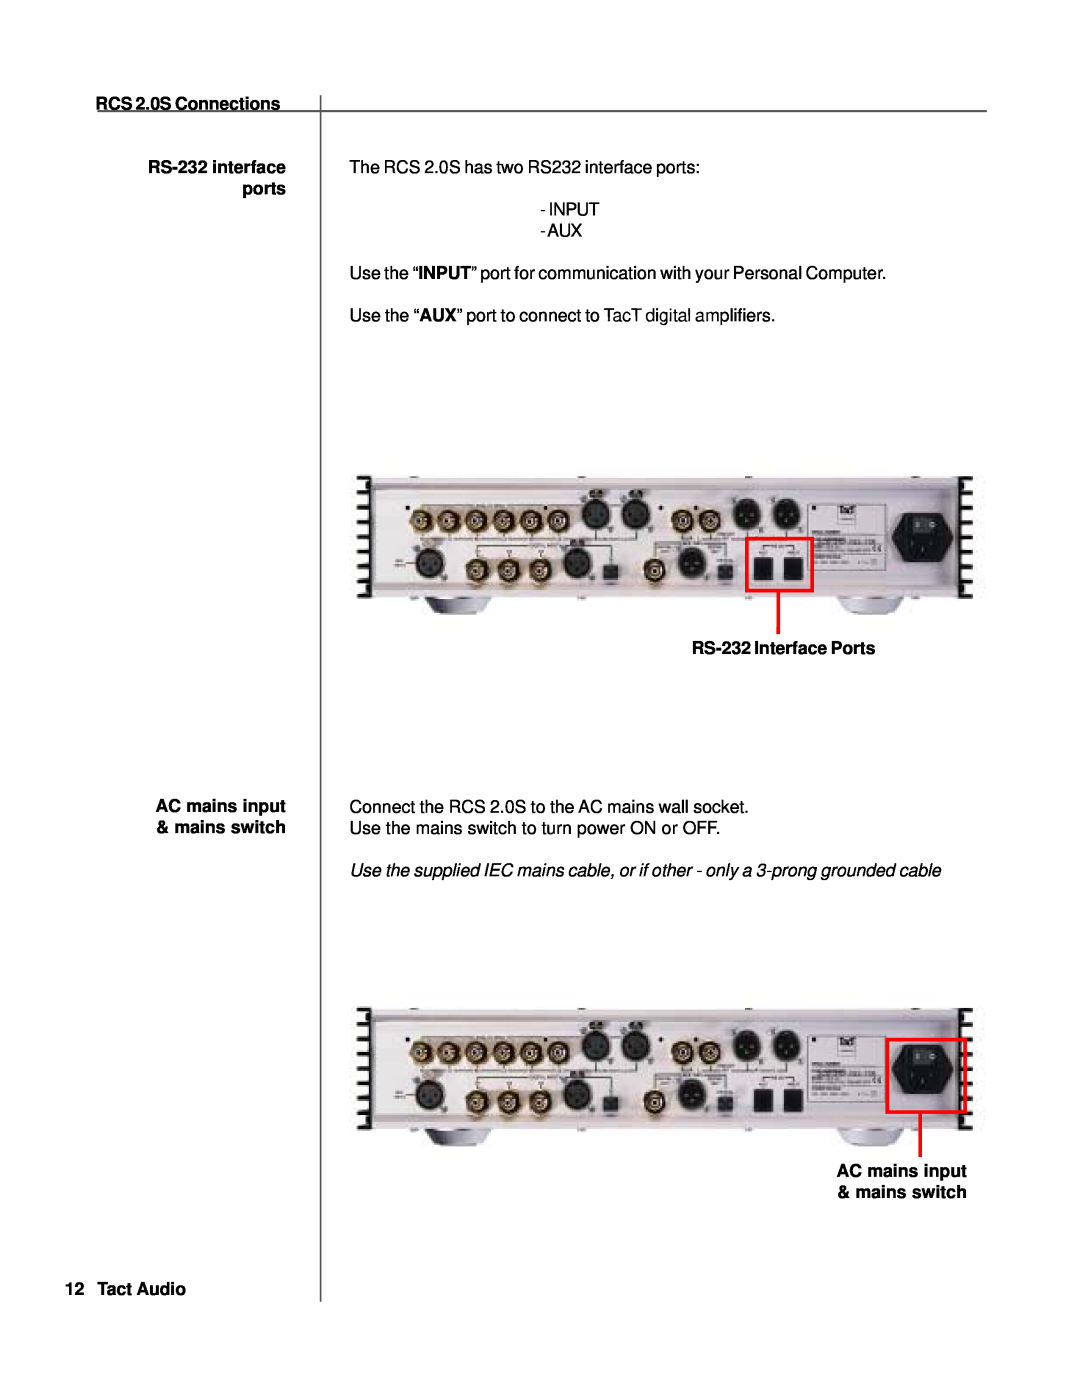 TacT Audio RCS 2.0S Connections, RS-232 interface, ports, RS-232 Interface Ports, AC mains input, Tact Audio 